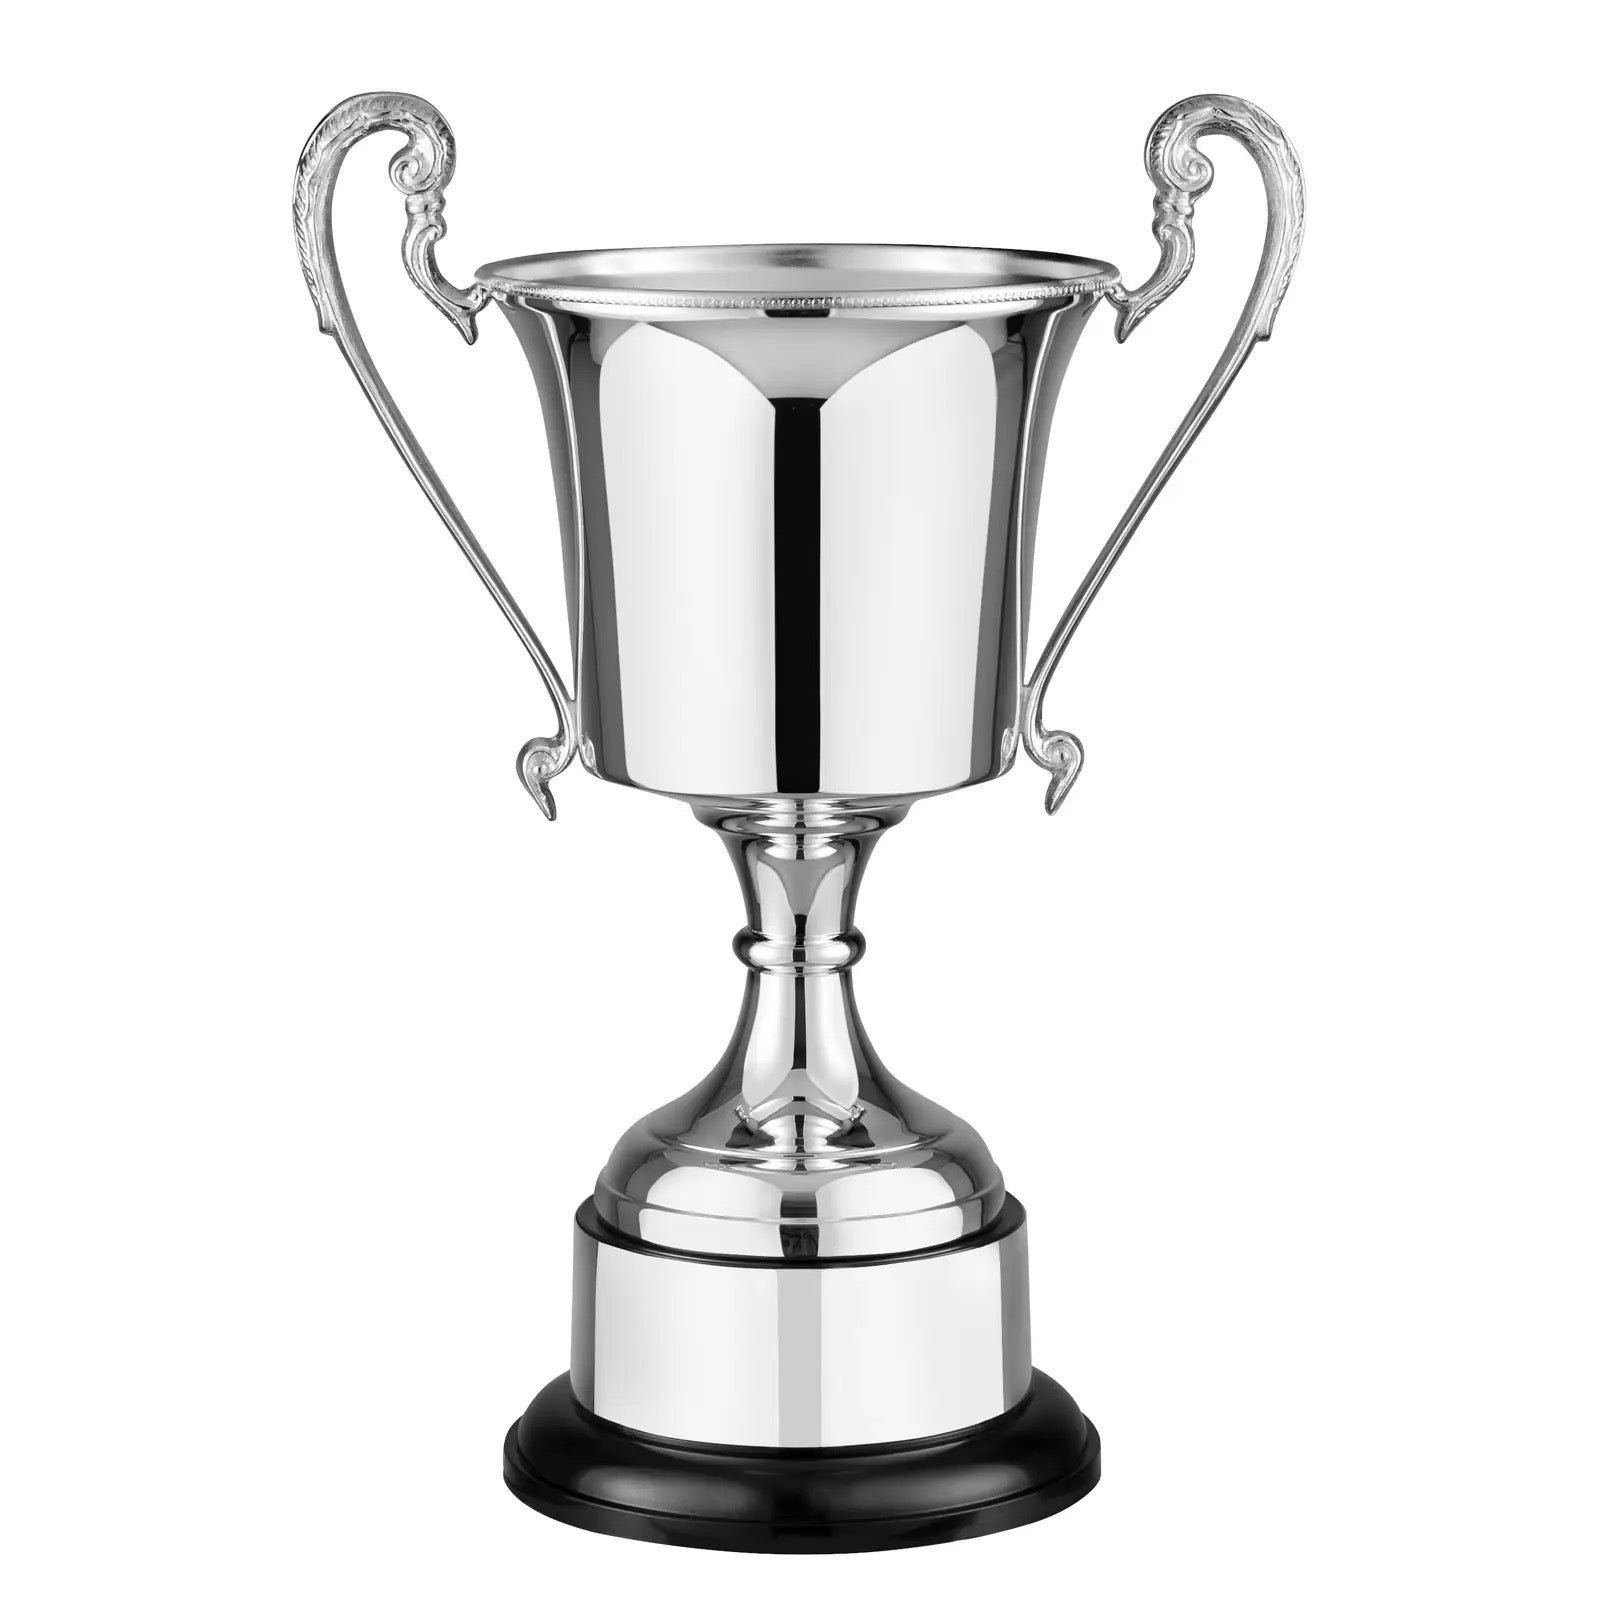 Silver Plated Studio Cup Award With Regal Handles